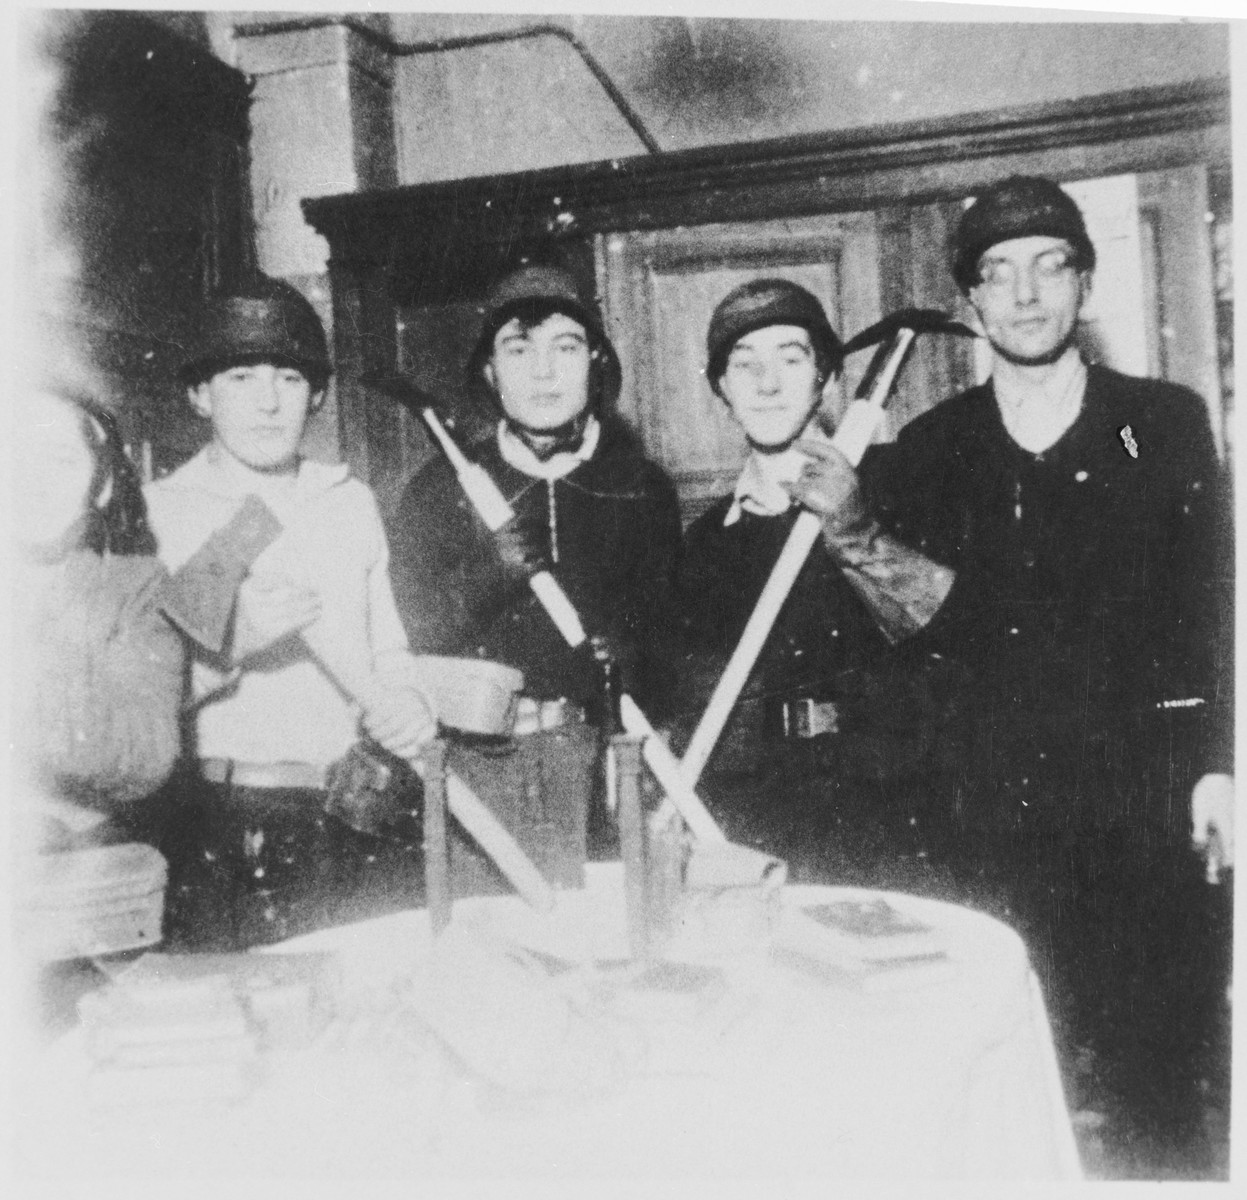 Students and teachers at the Youth Aliyah school in Berlin pose with helmets and tools during a mandatory air raid patrol shift.  

Pictured on the far right is the director of the school, Jizchak Schwersenz.